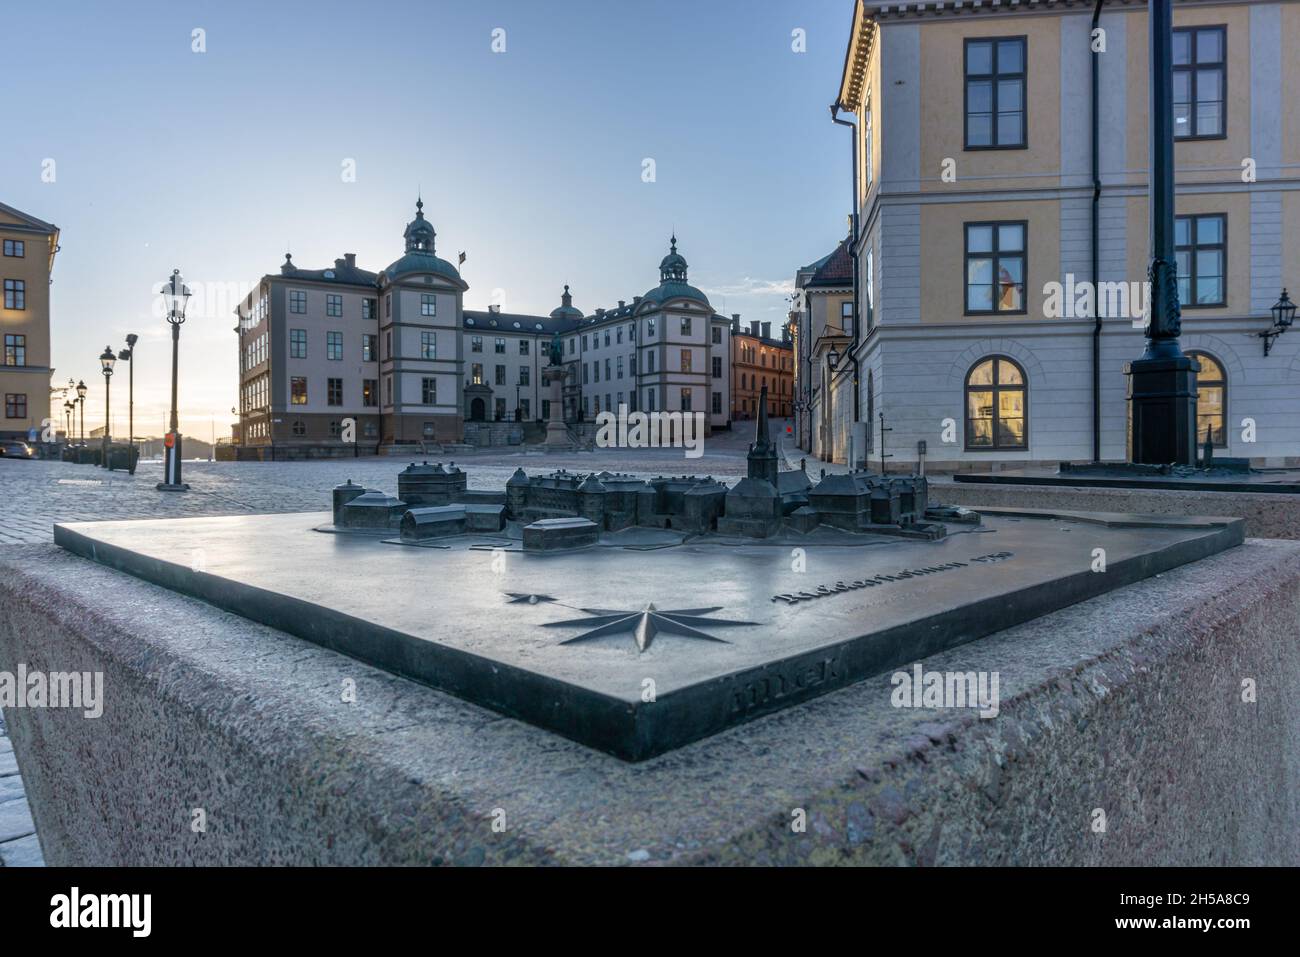 Stockholm, Sweden - April 5, 2021: View onto bronze plate with miniature model of buildings on one of islands in center of Stockholm Stock Photo